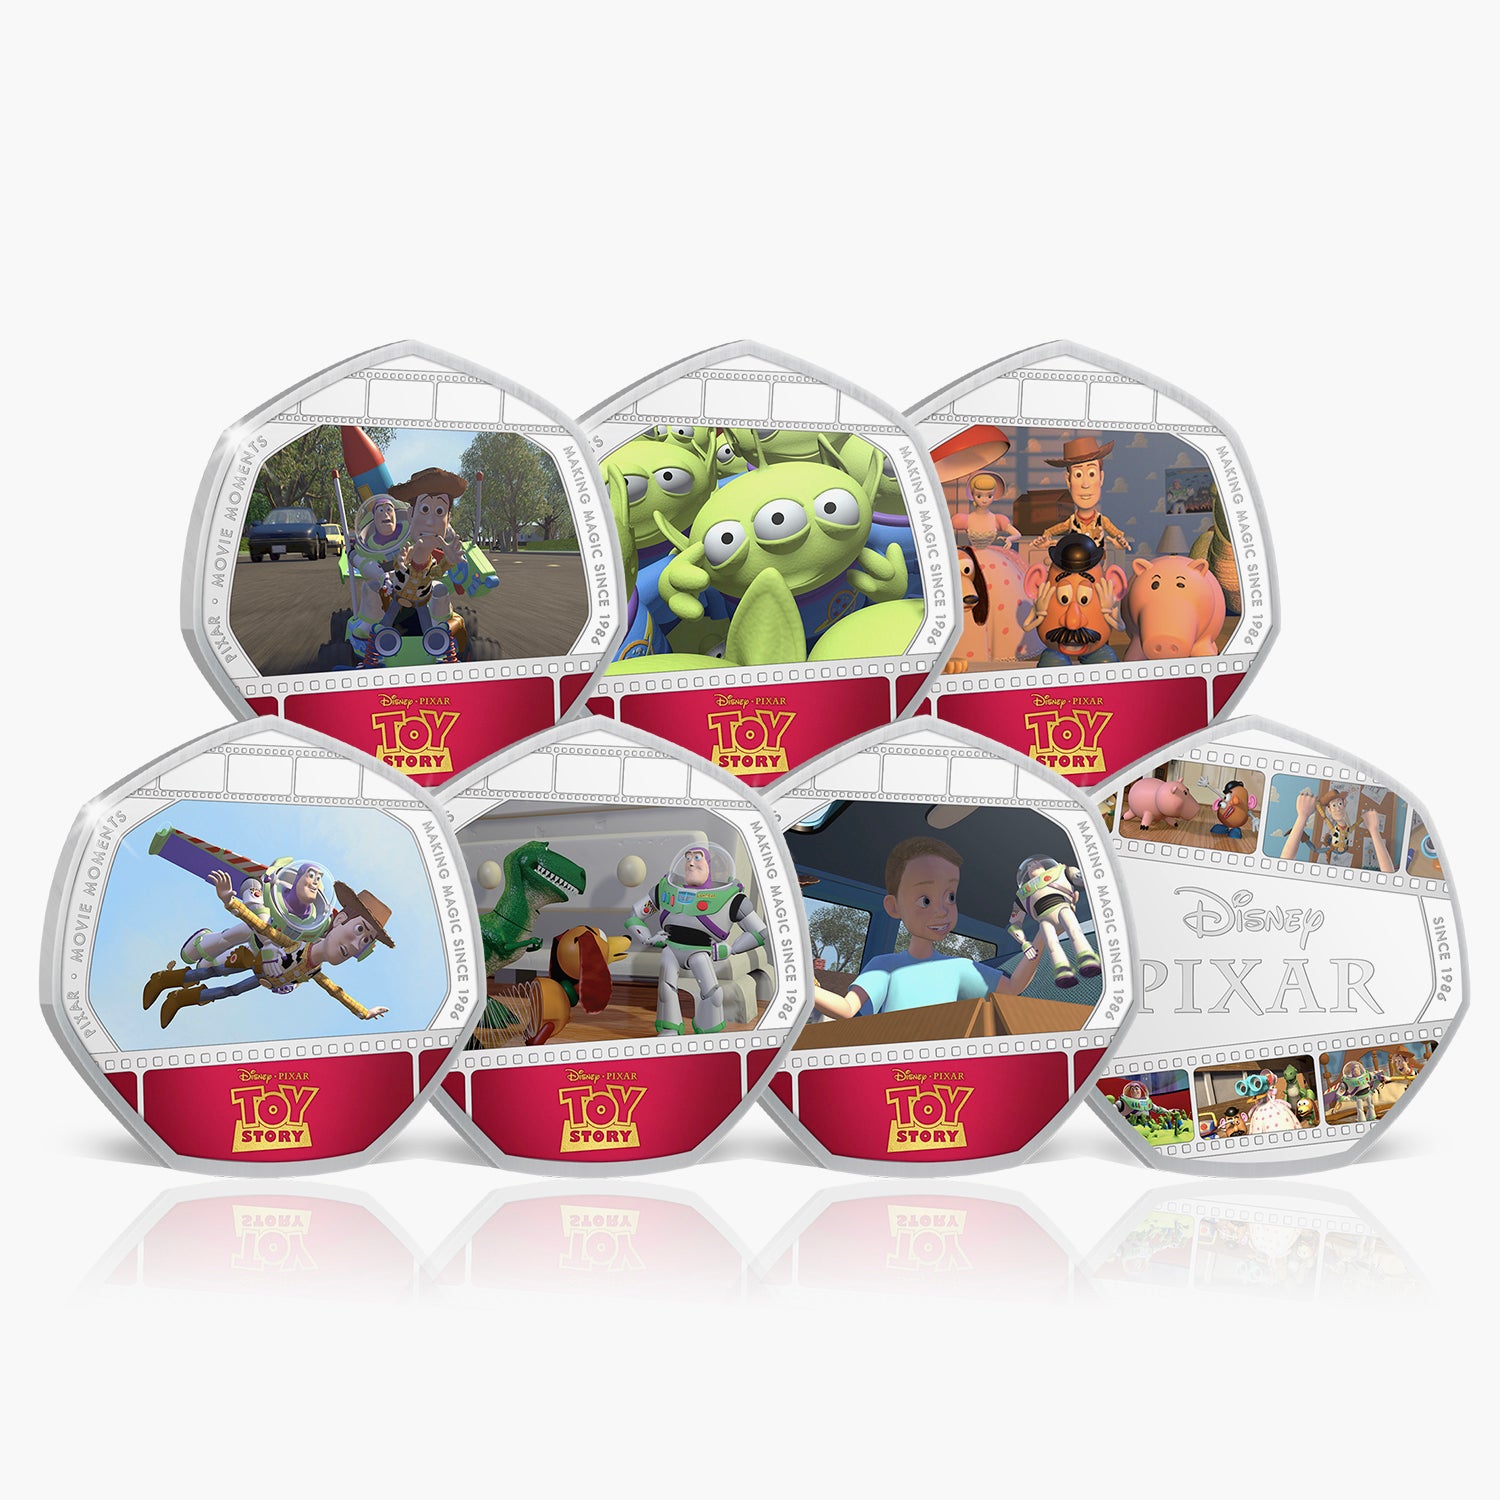 Pixar Movie Moments Collection